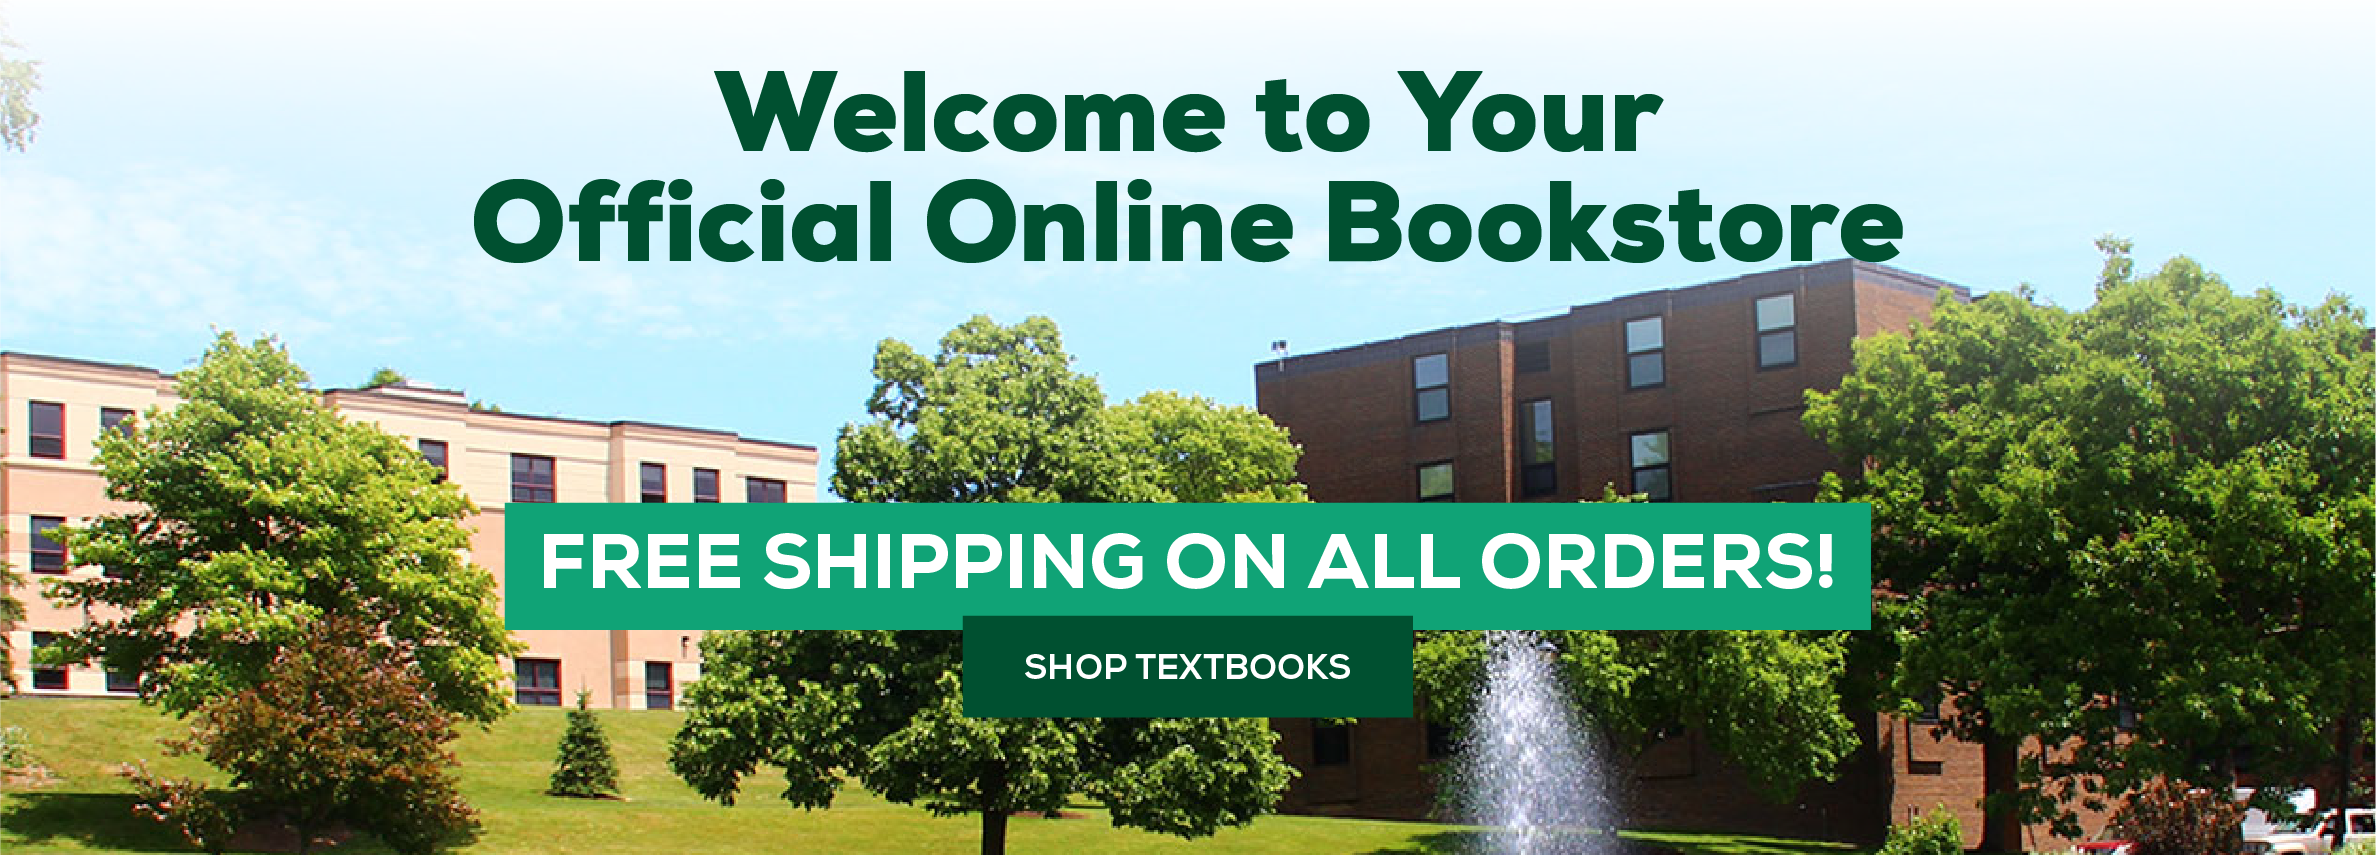 Welcome to your official online bookstore. Free shipping. Click to shop textbooks.